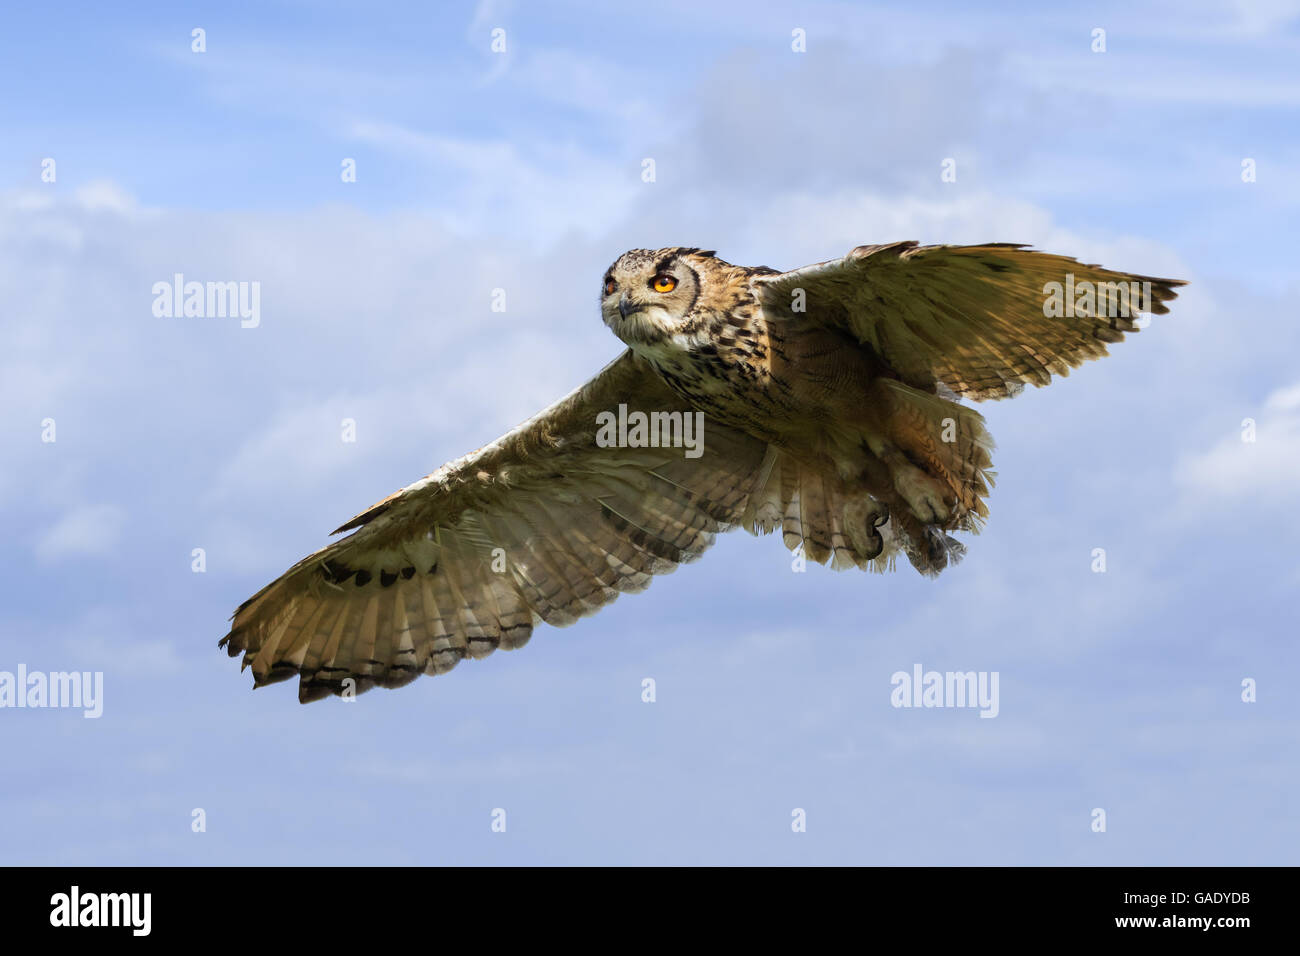 Bengal Eagle Owl in the sky Stock Photo